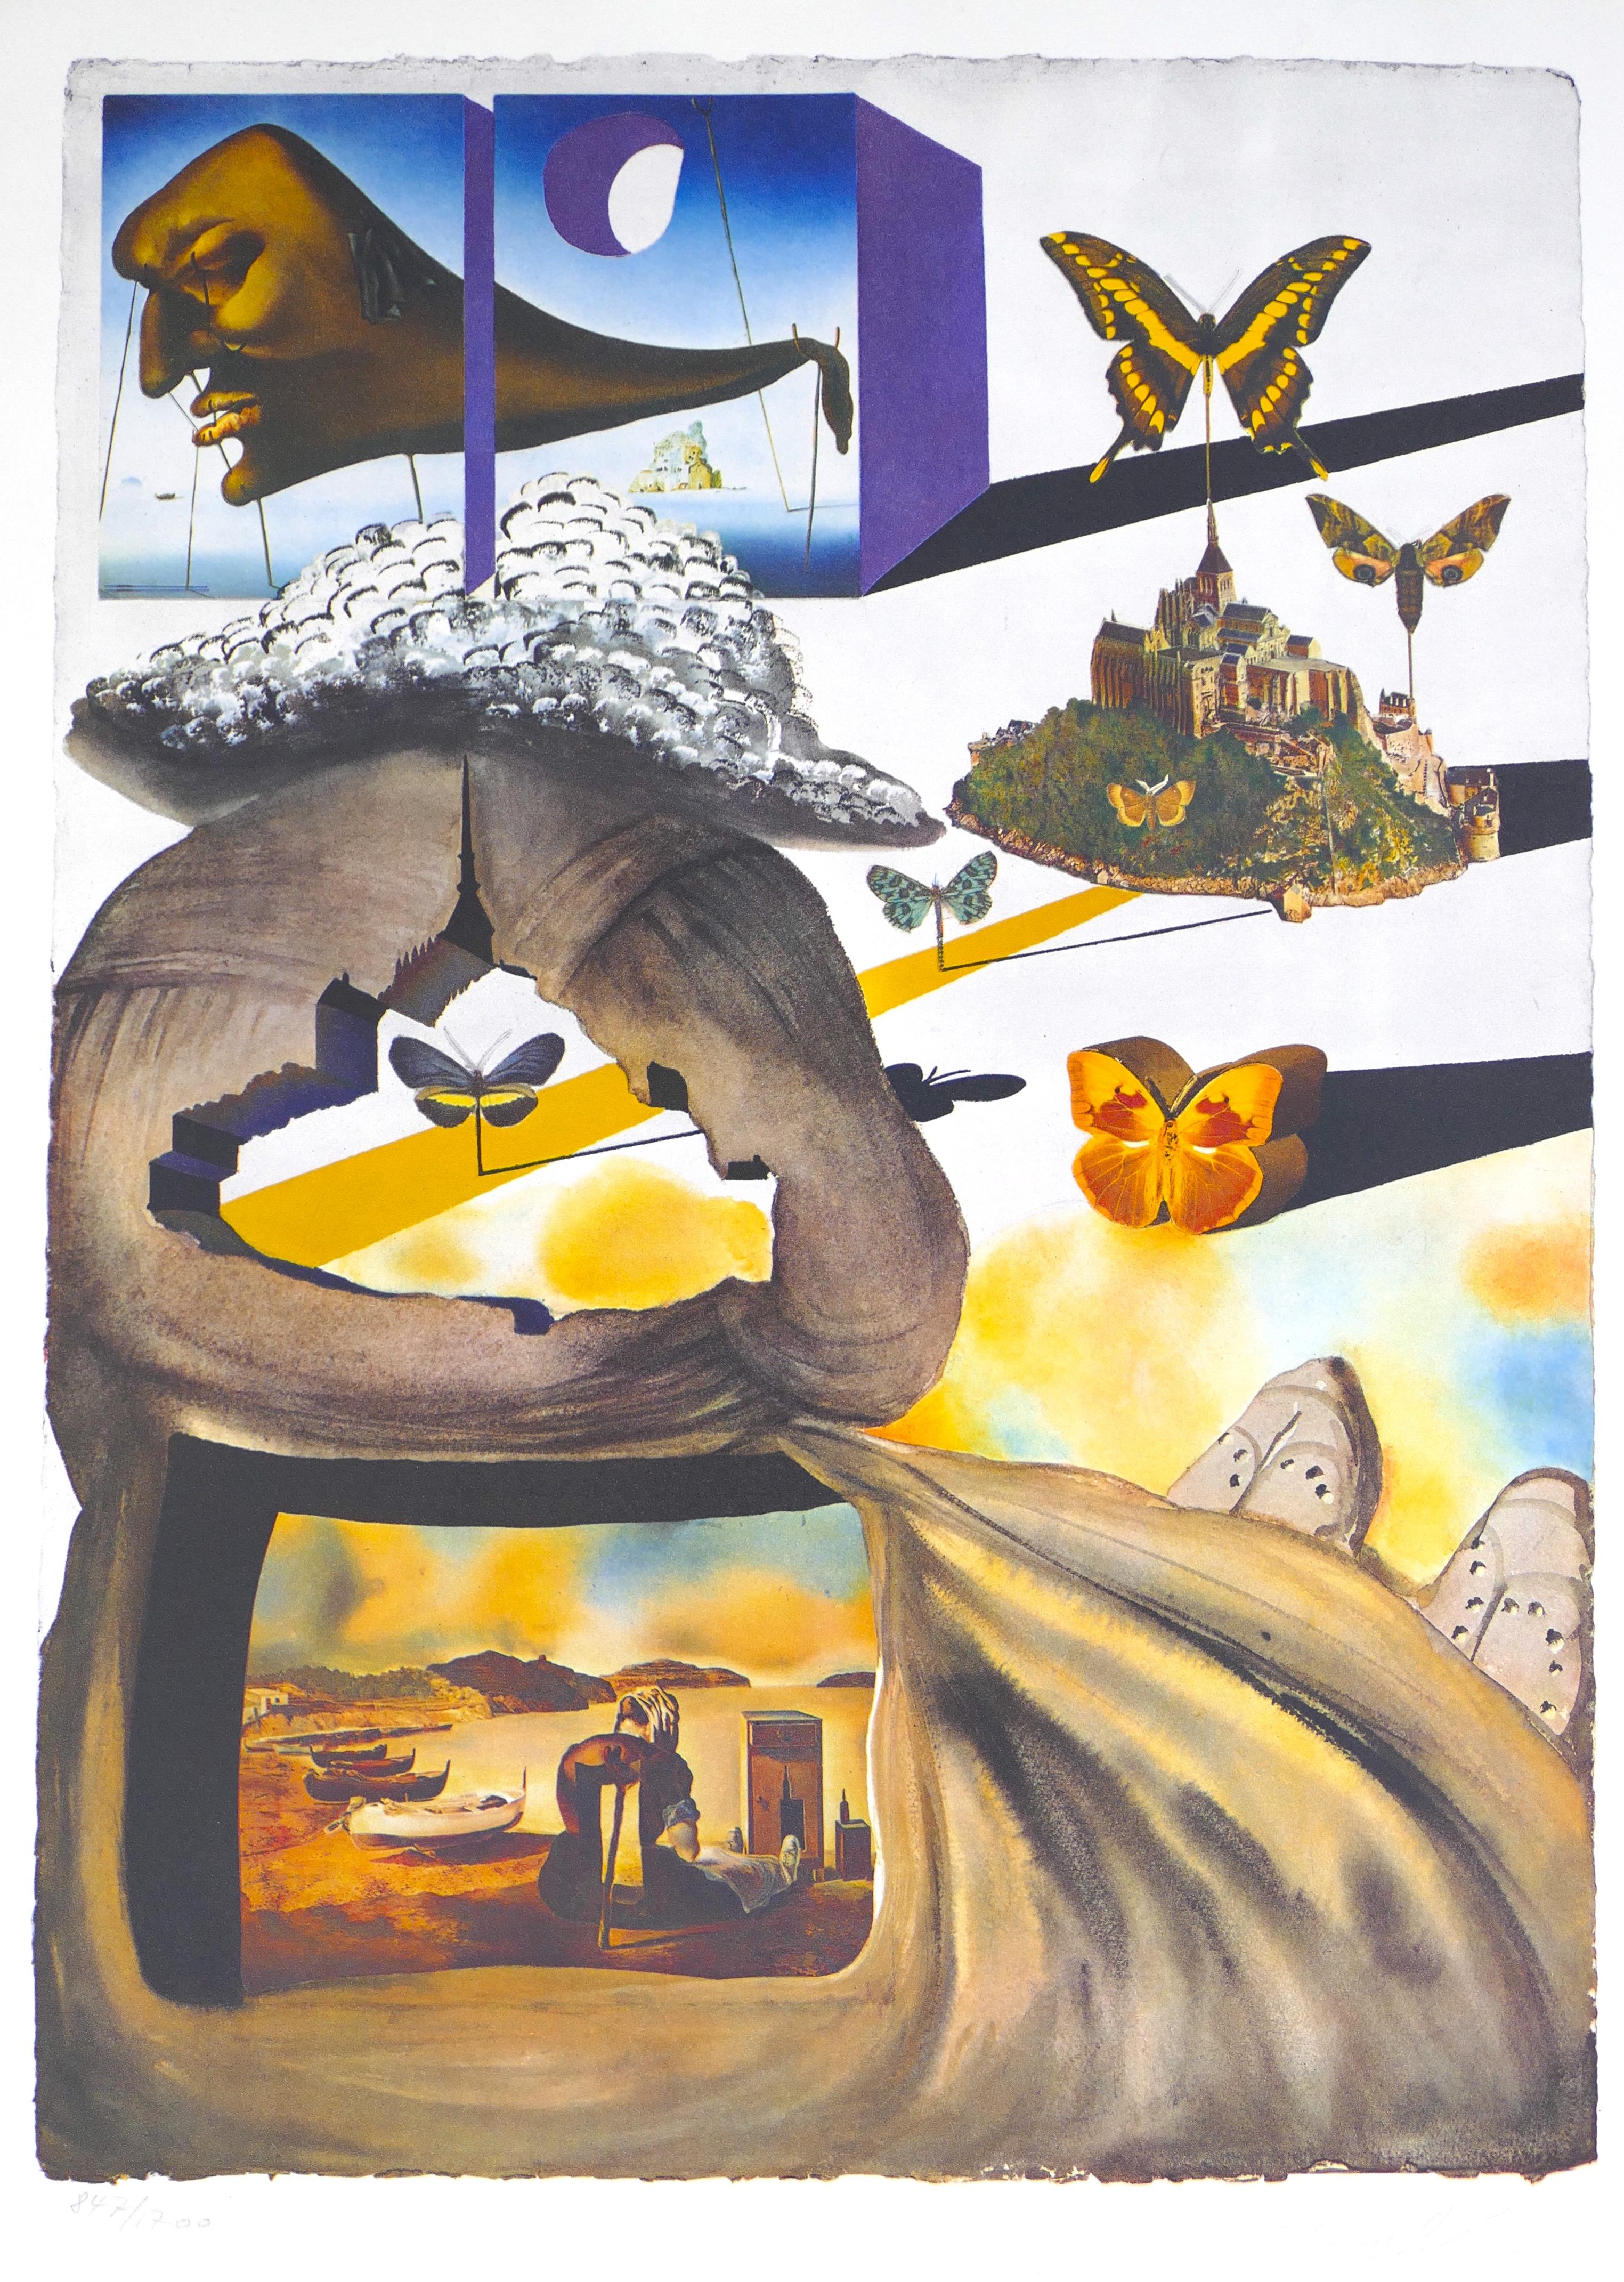 Salvador Dalí Print - Plate II - From "Suite Papillon" - Original Lithograph and Heliogravure - 1969